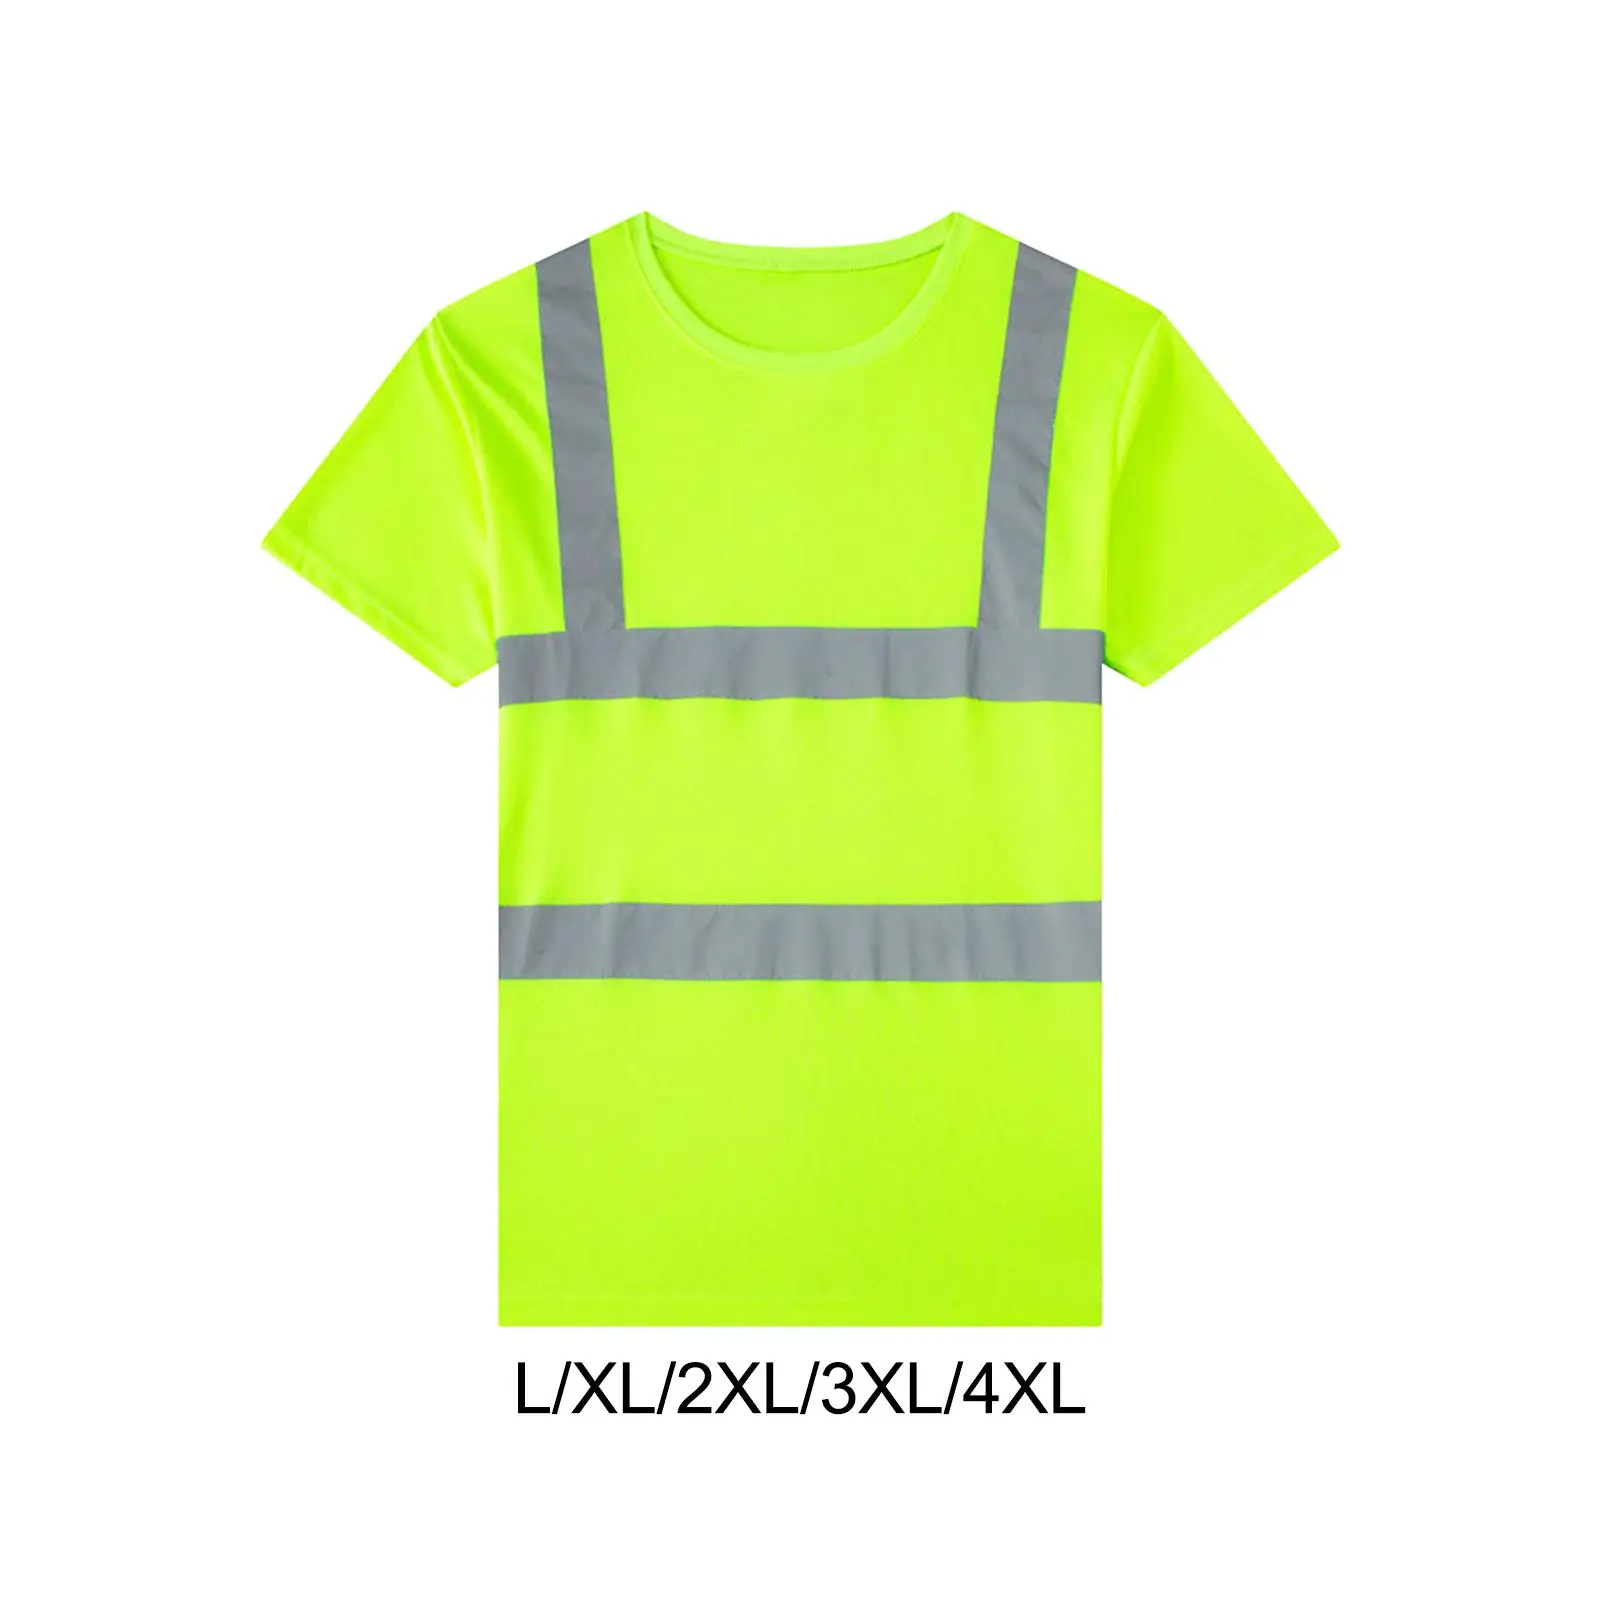 High Visibility Reflective Shirts 360° Reflective Coverage Safety T Shirts for Construction Firefighter Outdoor Cycling Railroad